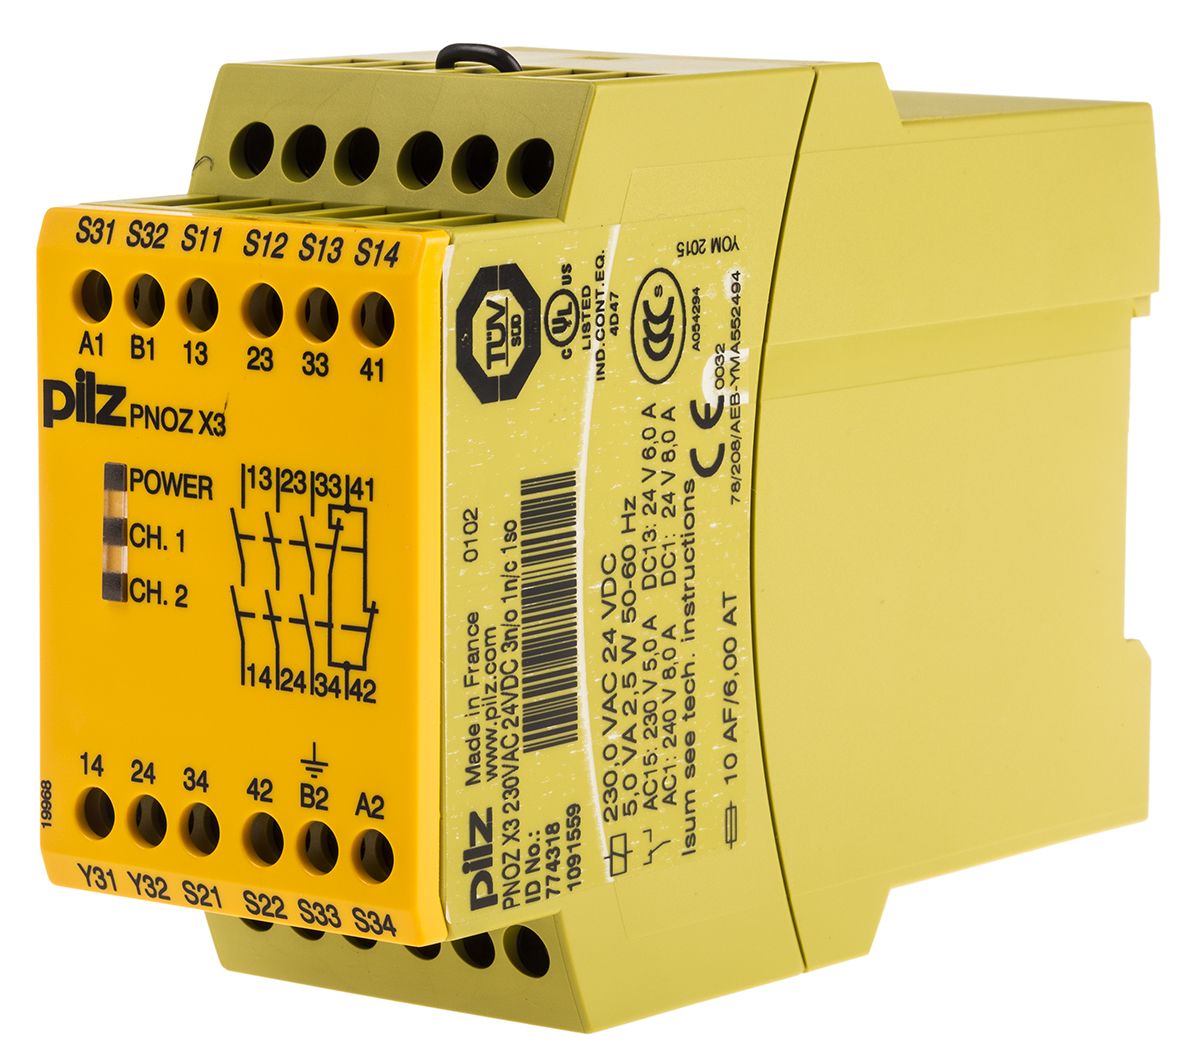 Pilz PNOZ X3 Series Dual-Channel Emergency Stop Safety Relay, 24 V dc, 230V ac, 3 Safety Contact(s)